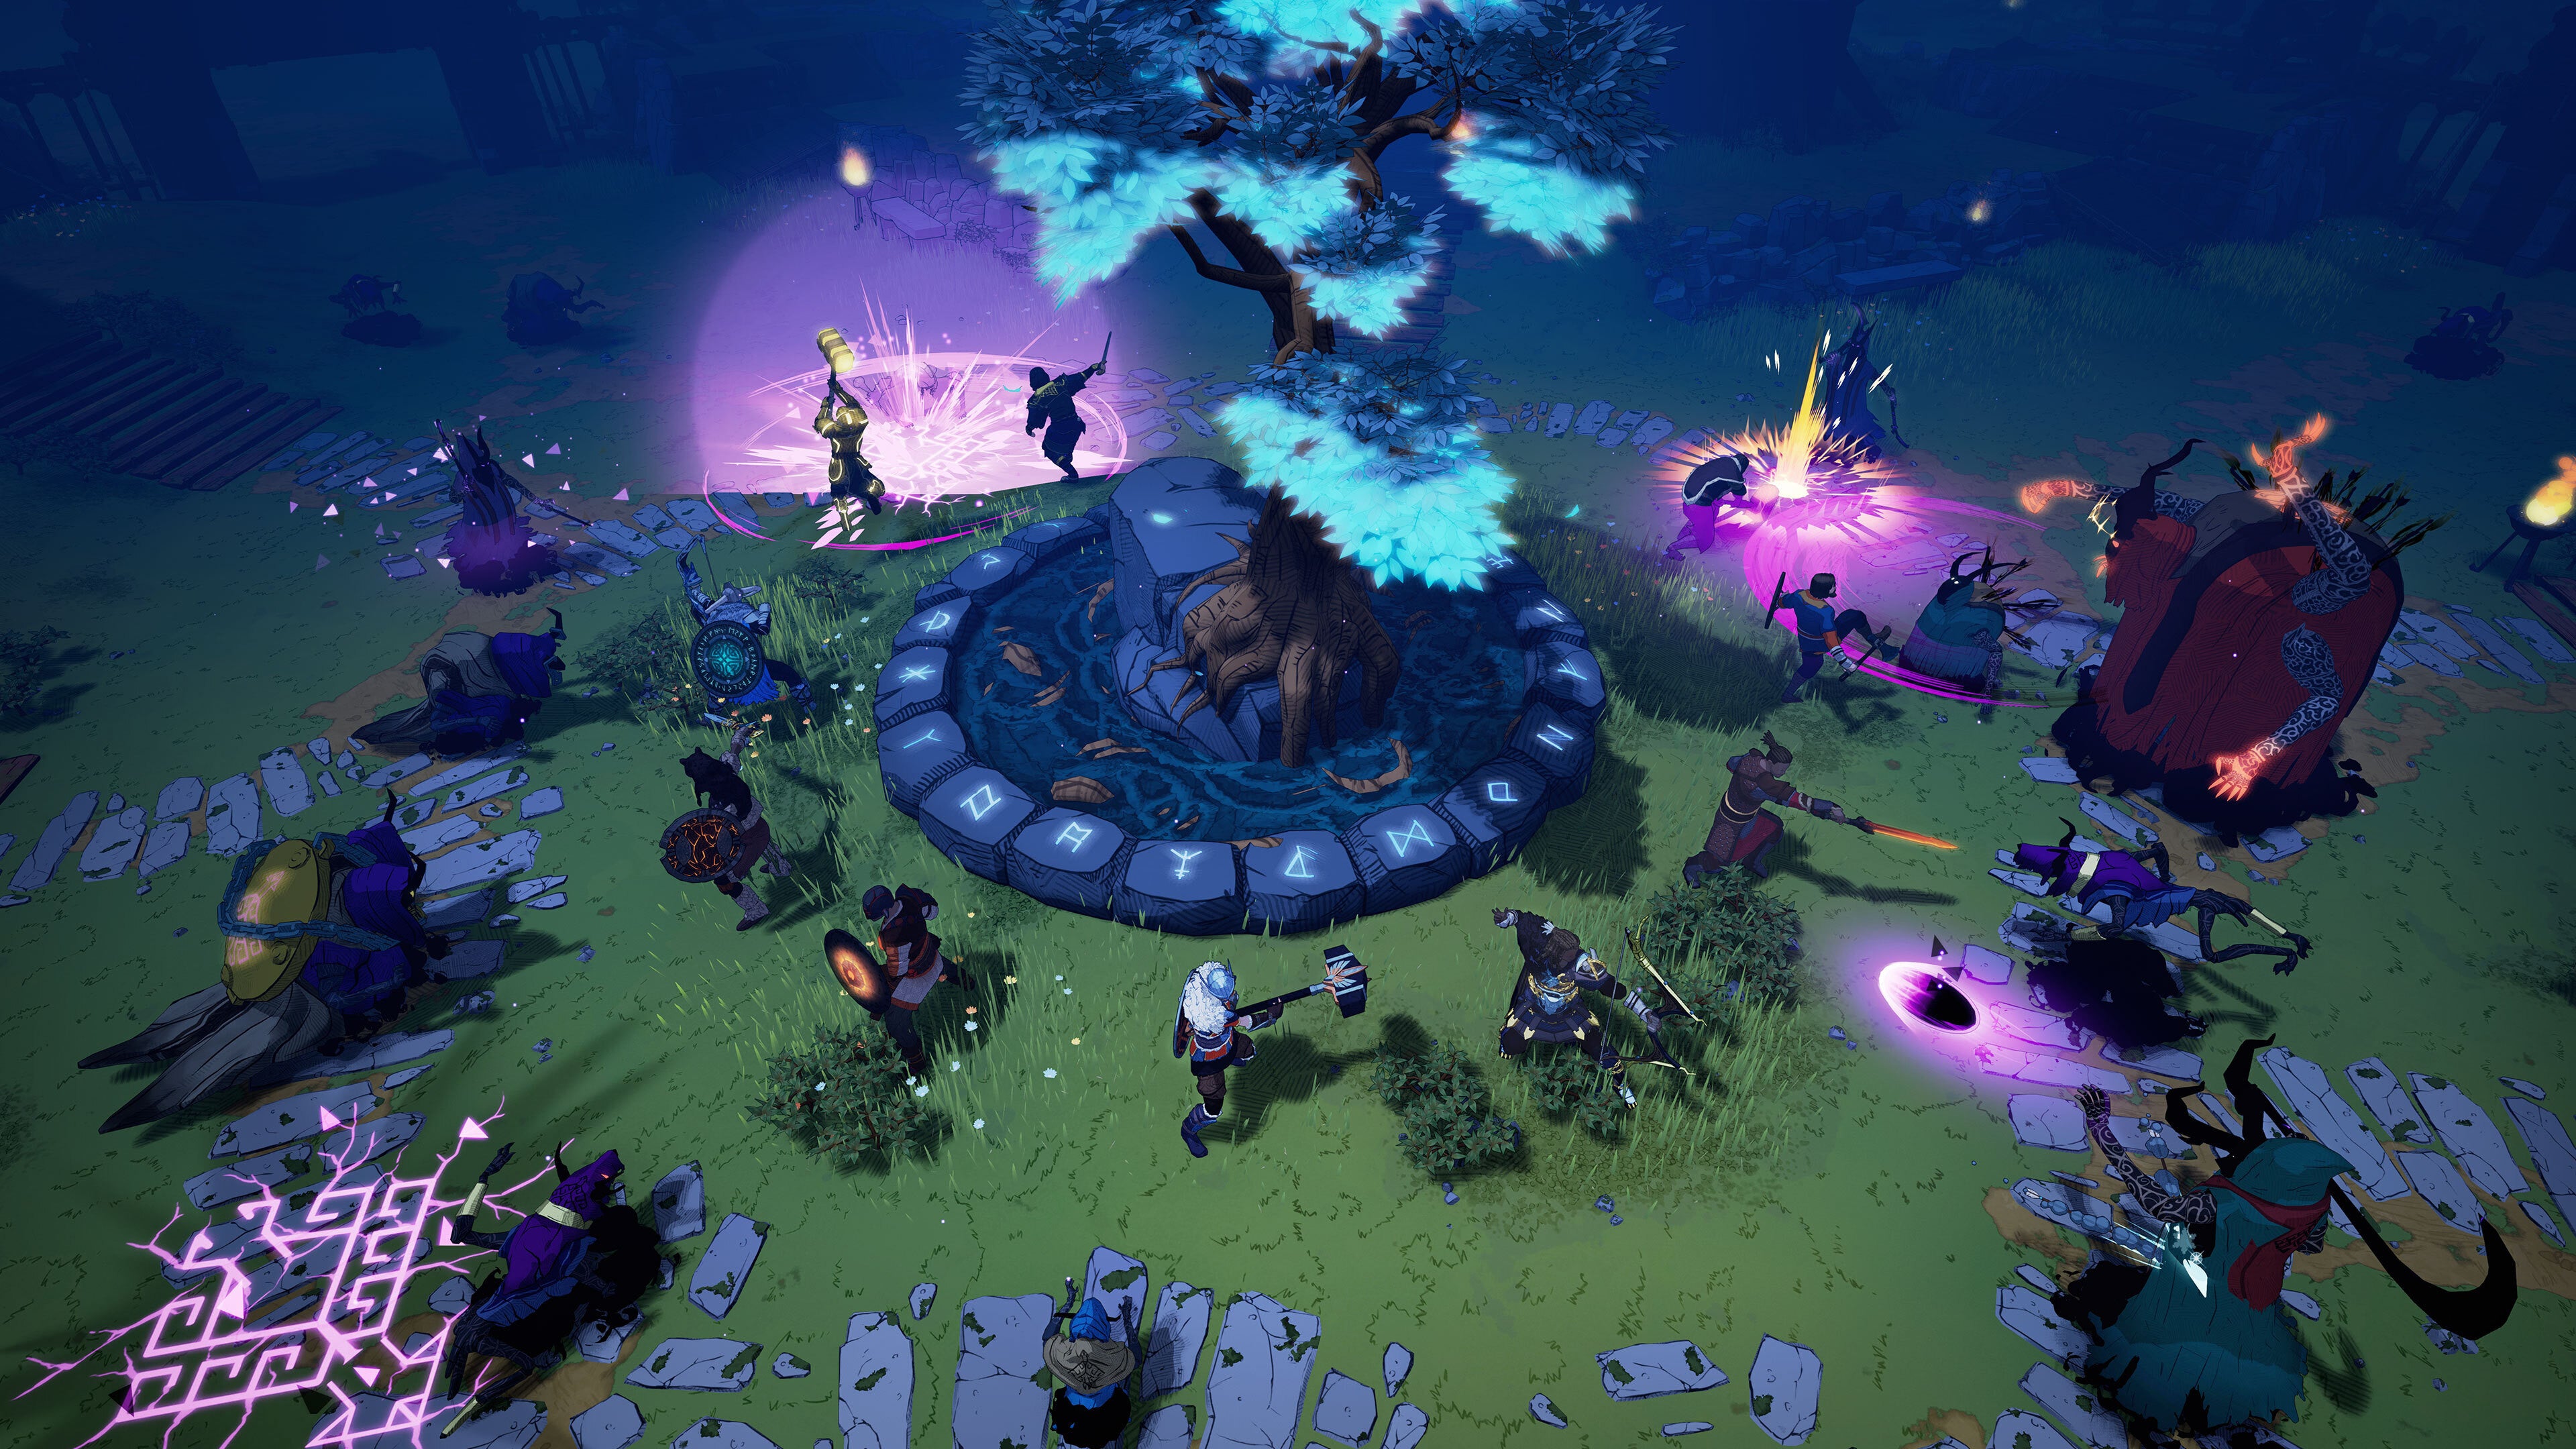 Tribes Of Midgard - Several viking players stand with their backs to a central tree, defending it from encroaching enemies at night.